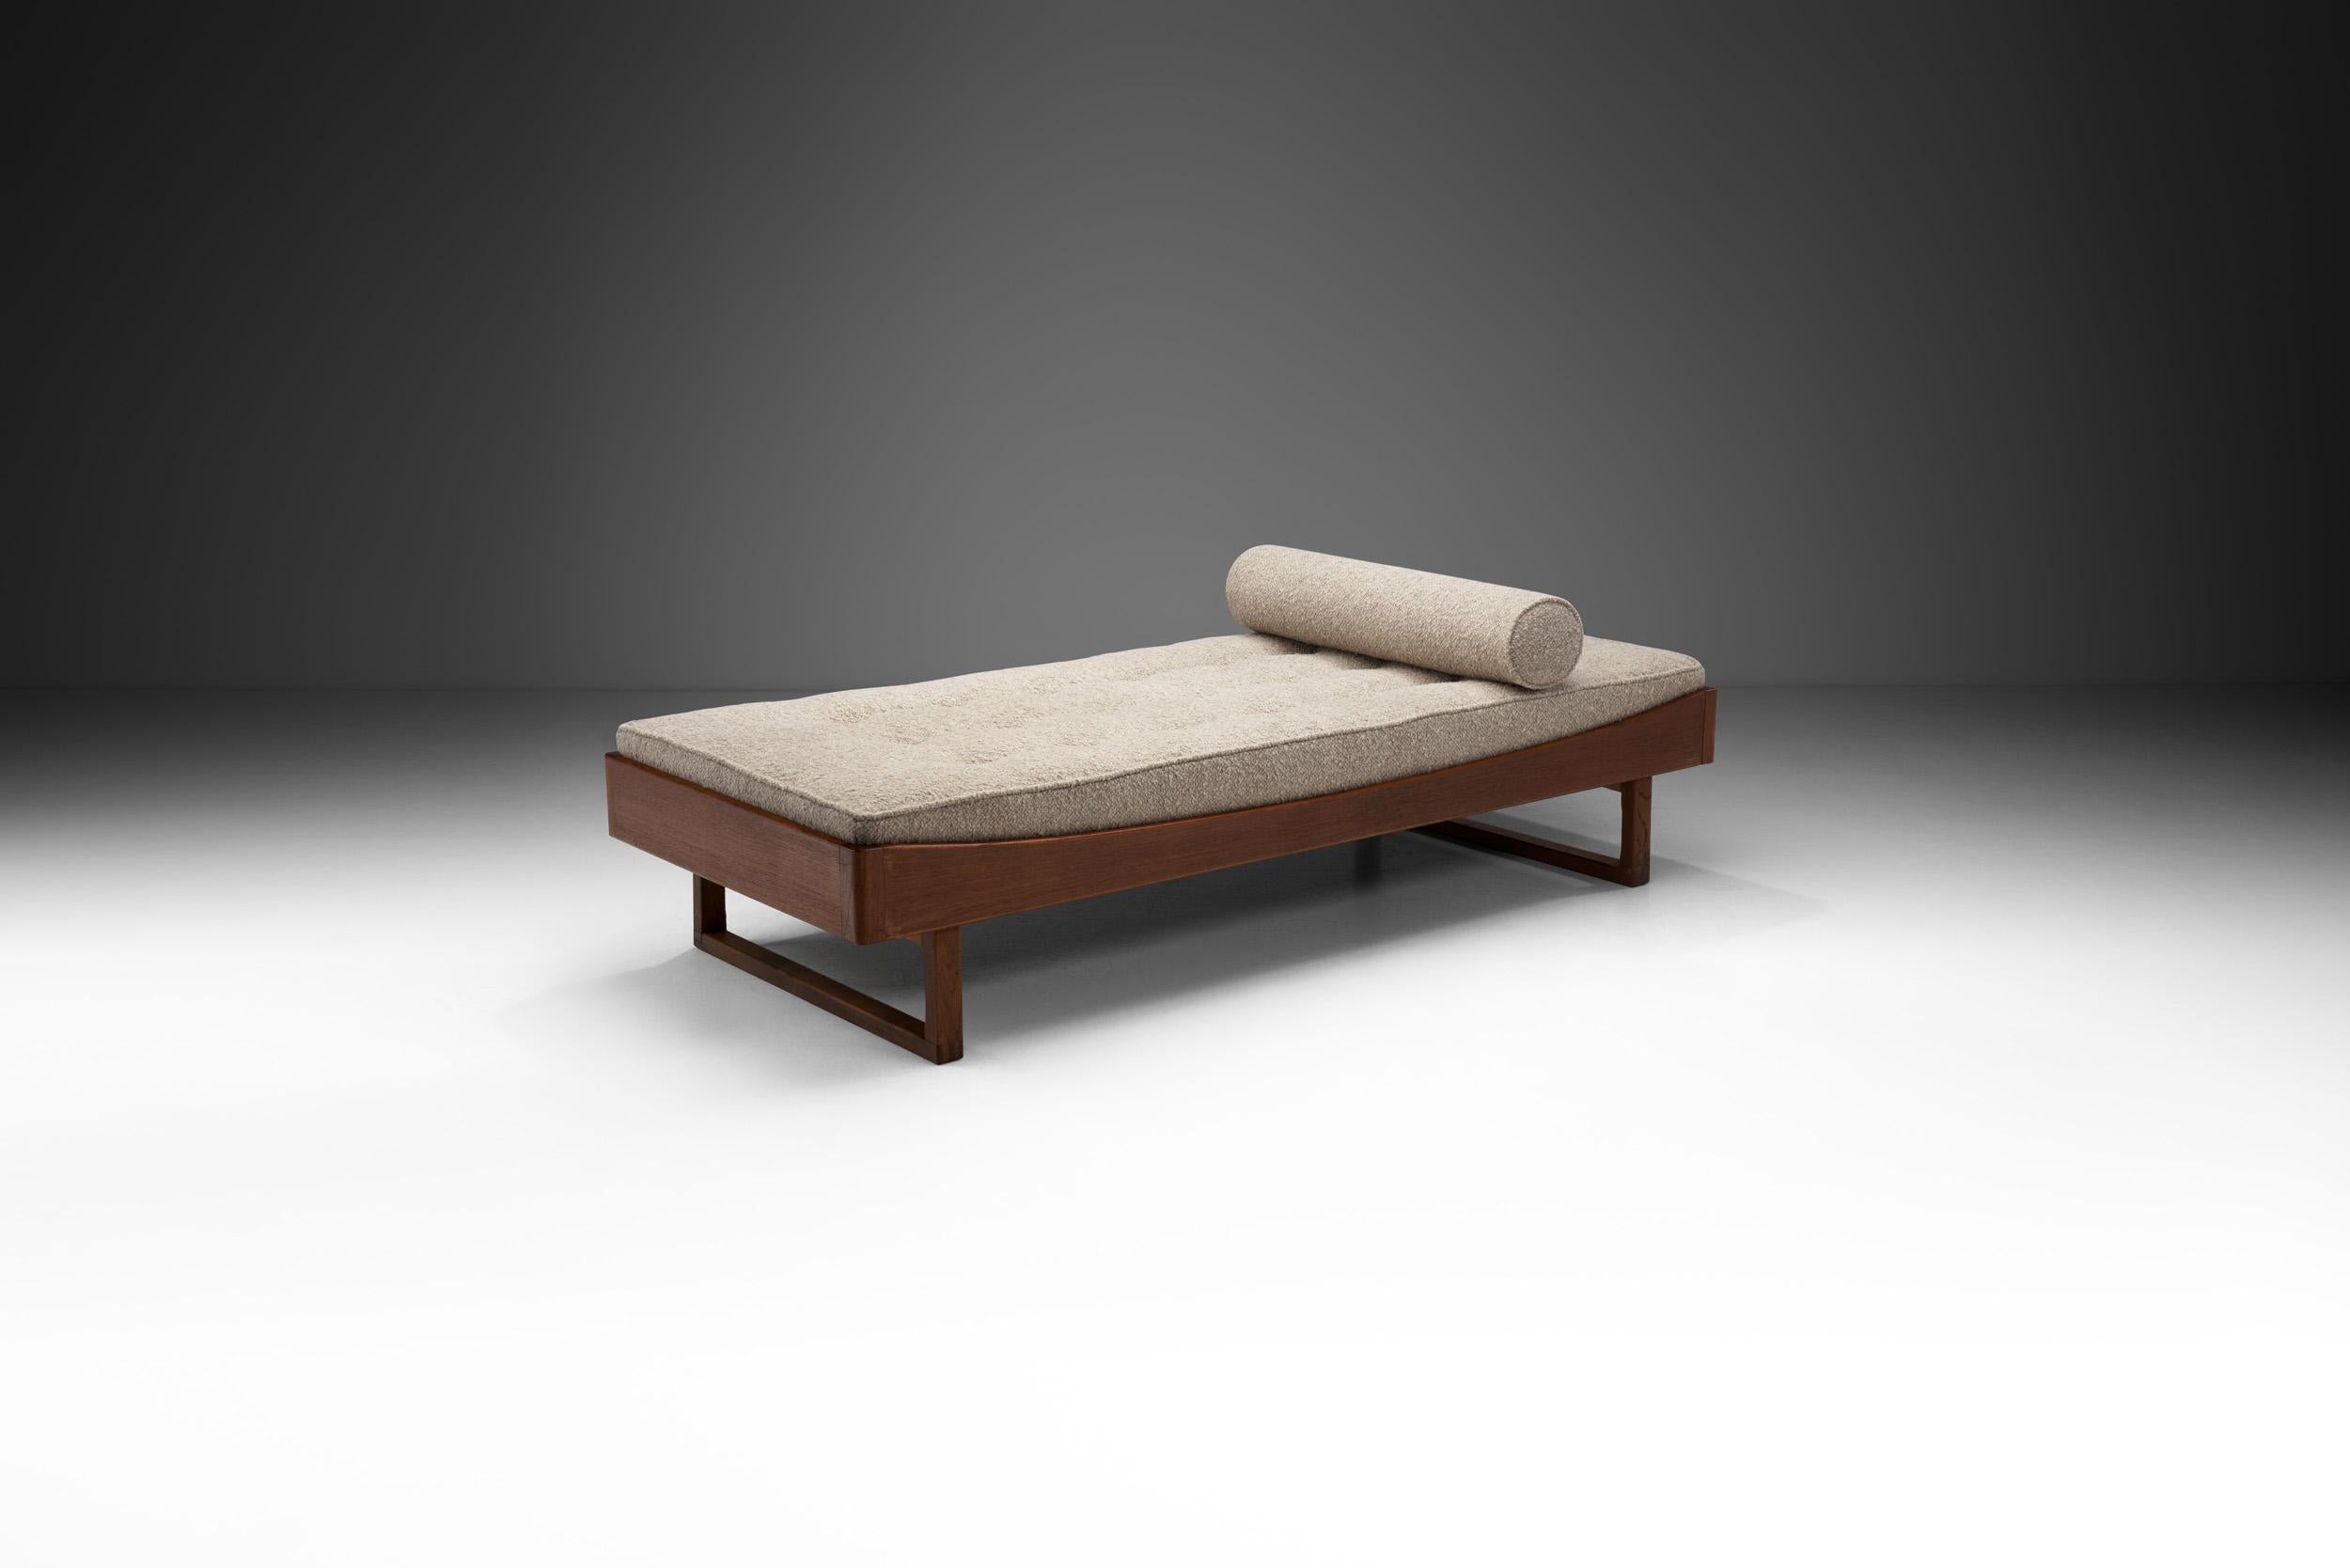 ??This gorgeous oak daybed model by the Danish furniture maker Bernhard Pedersen og Søn was inspired by Classic Danish furniture design and simplicity.

The streamlined solid wood frame features a curvy top and geometric, so-called runner legs.